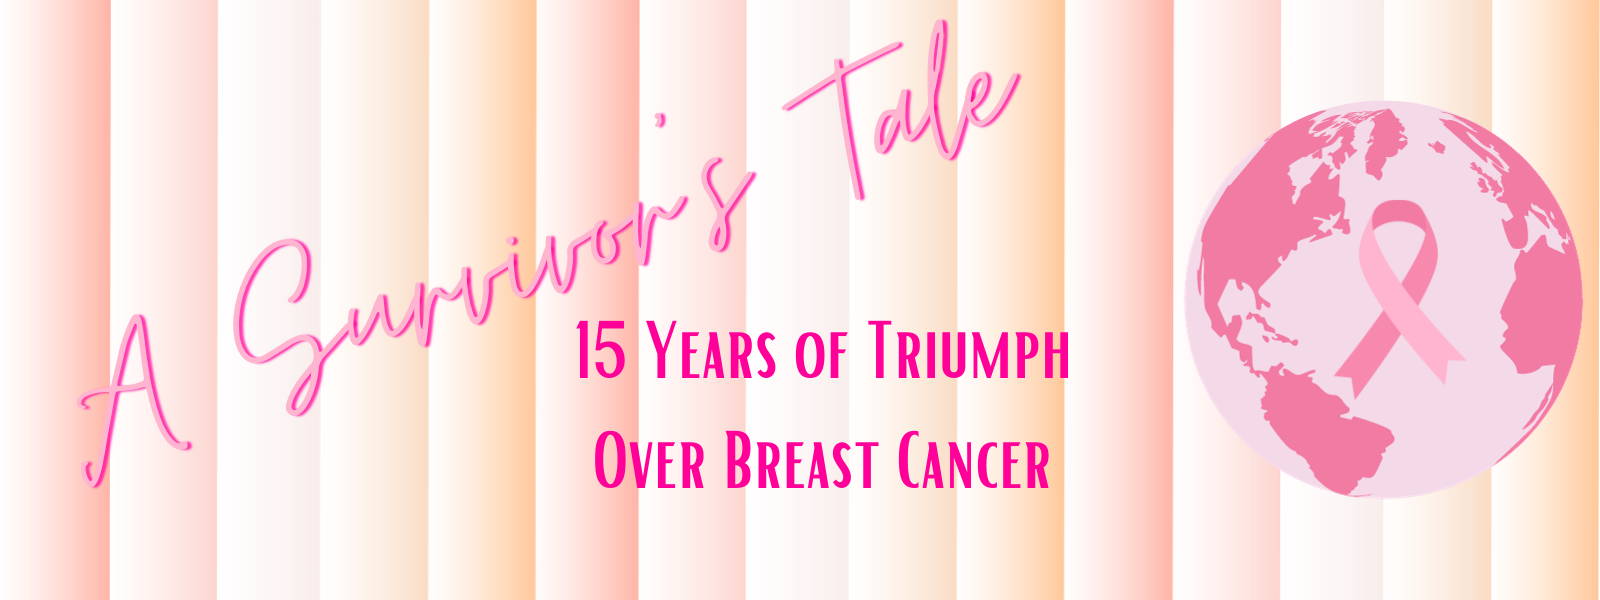 A Survivor's Tale: 15 Years of Triumph Over Breast Cancer